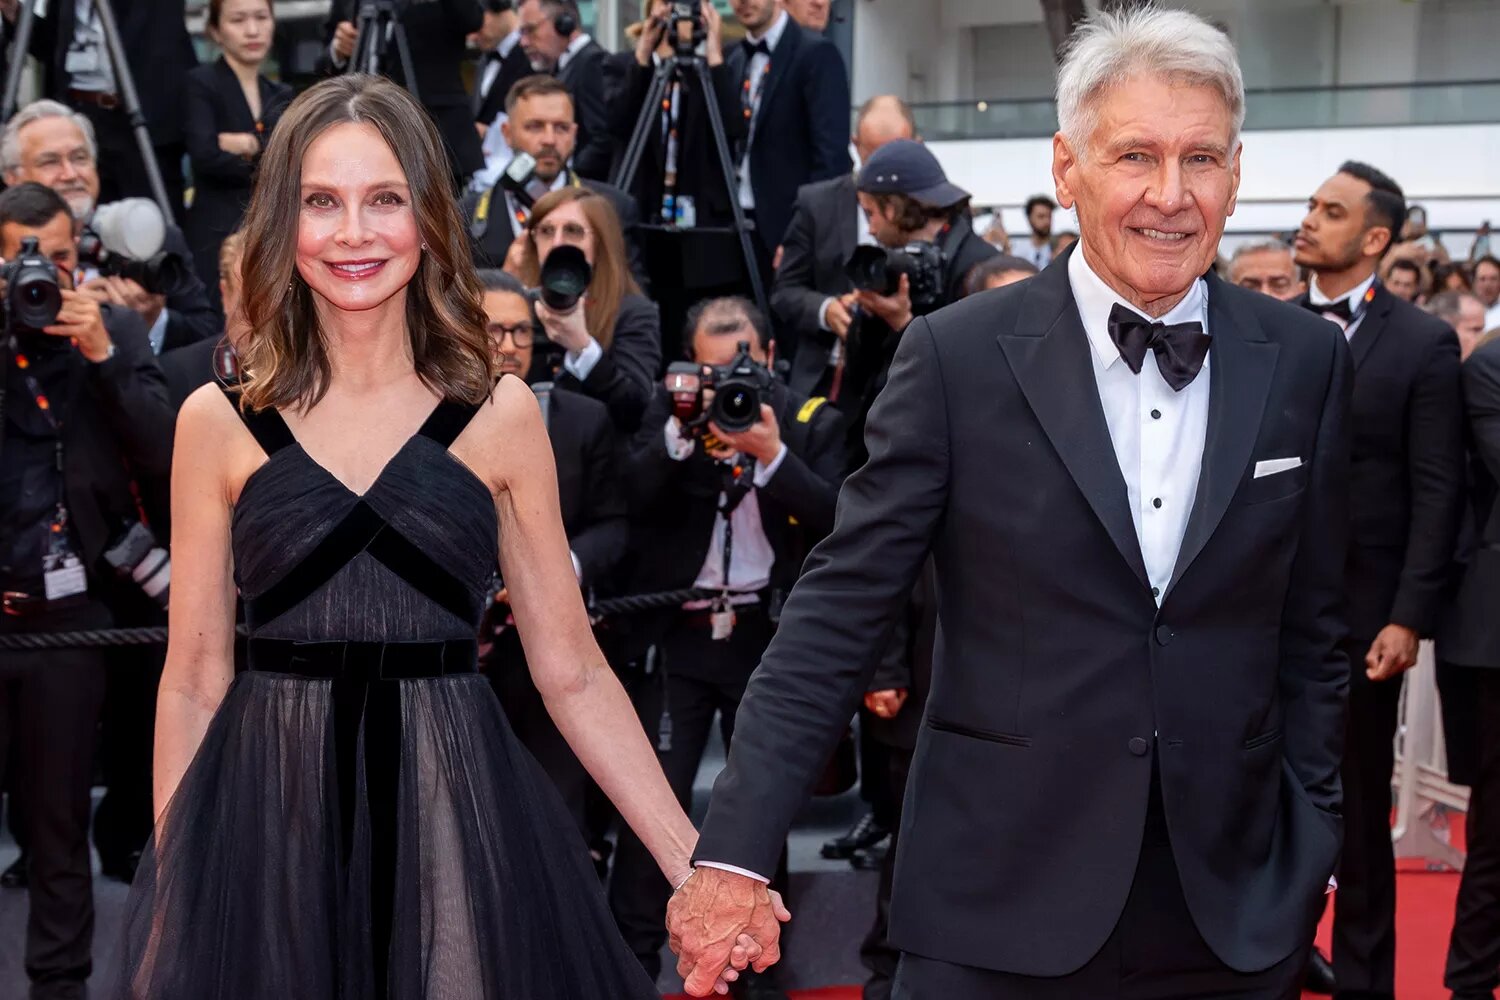 Harrison Ford and Calista Flockhart happily enter the Cannes Film Festival, anticipating the 'Indiana Jones' premiere.